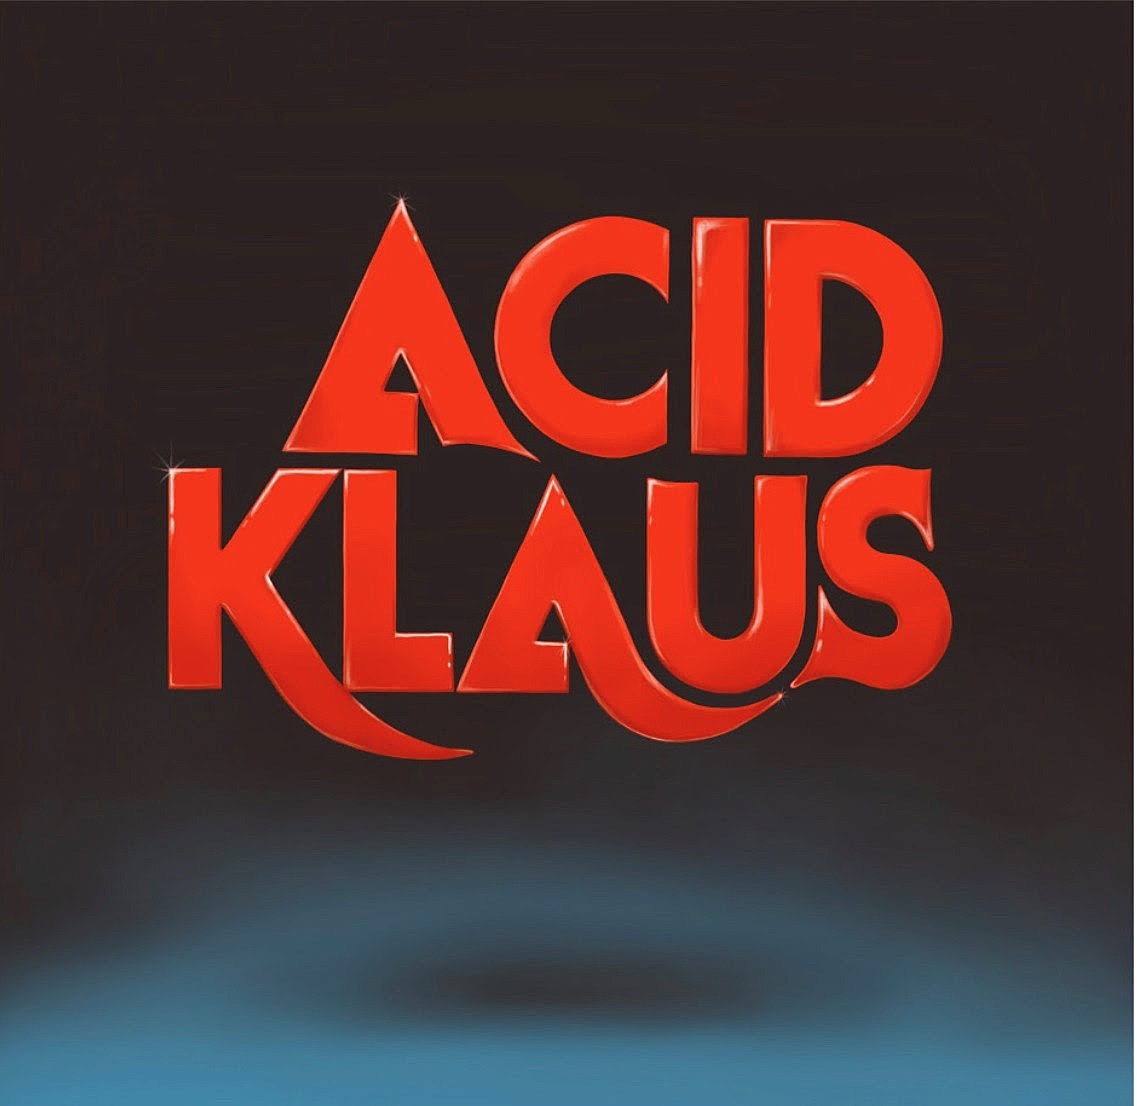 The Moonlandingz's Adrian Flanagan releases his terrific solo album as ACID KLAUS today that time jumps through 50 years of electronic dance music. Listen to the album and read our interview with Adrian about the album's influences brooklynvegan.com/acid-klaus-dis…